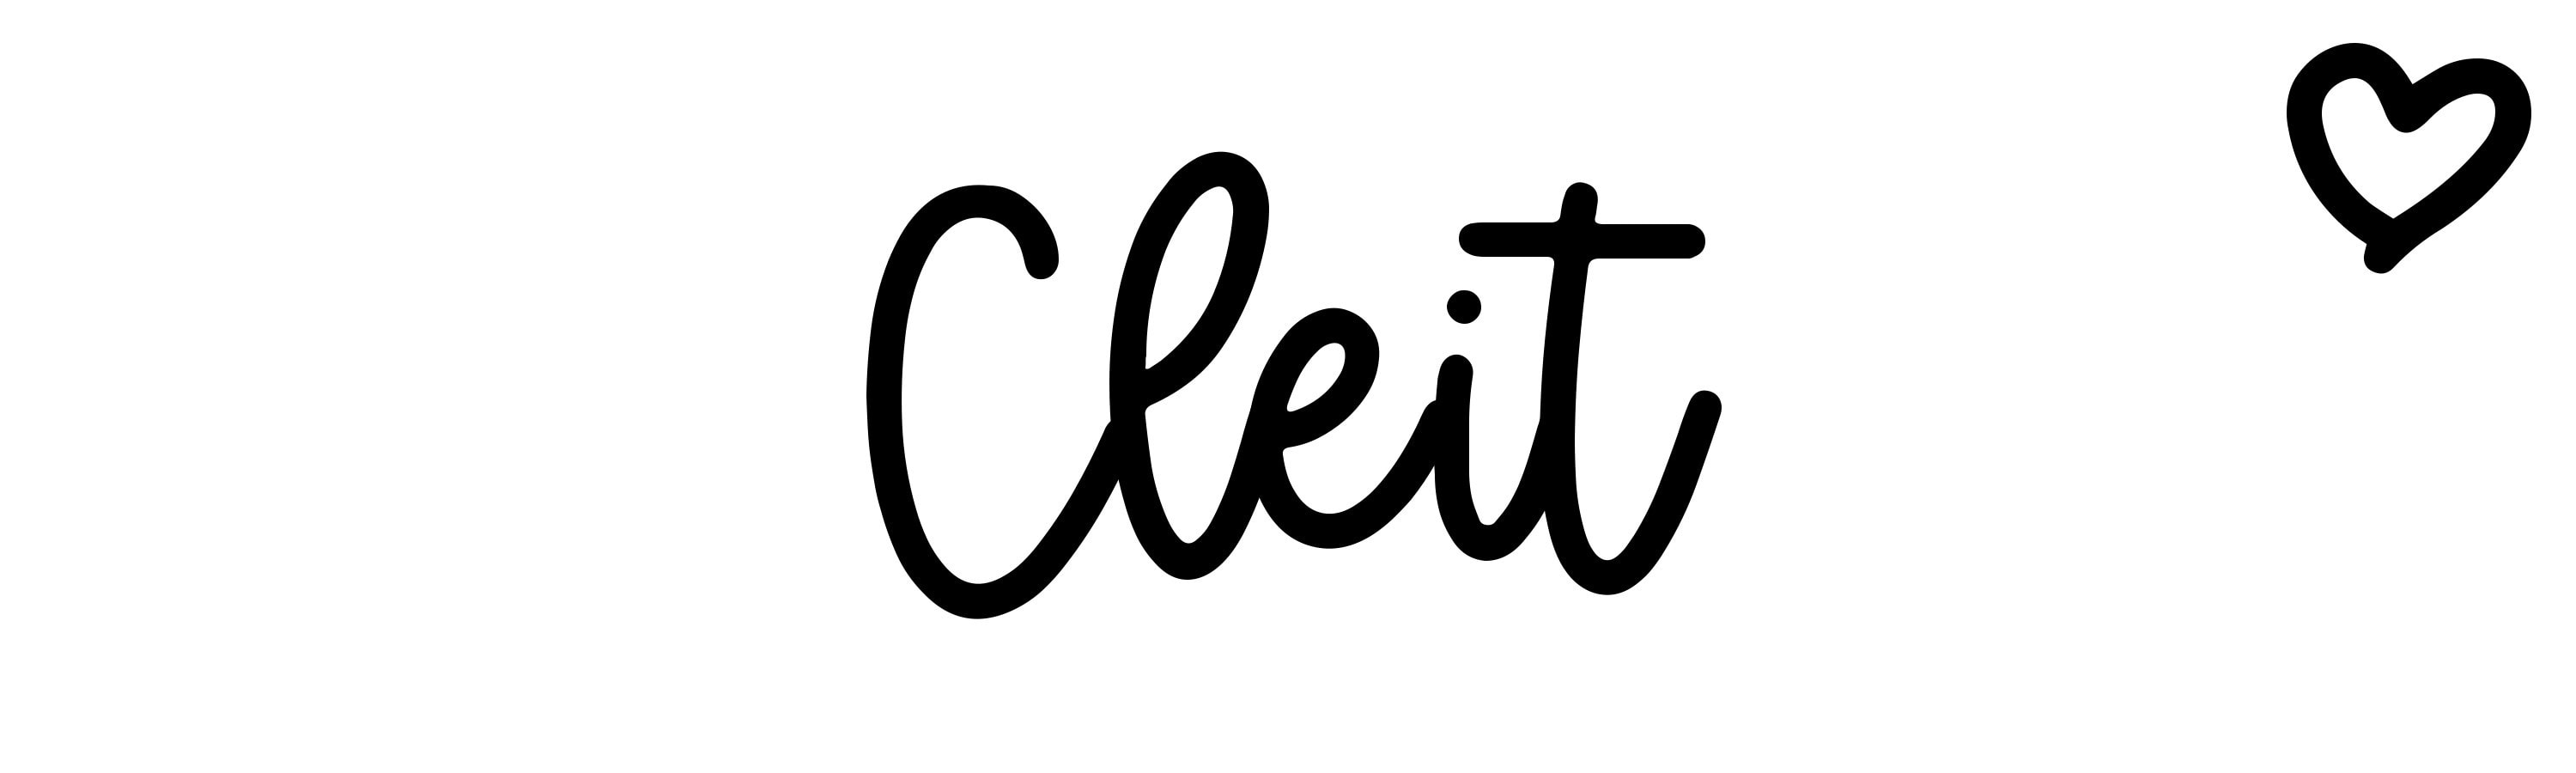 About the baby name Cleit - Click Baby Names